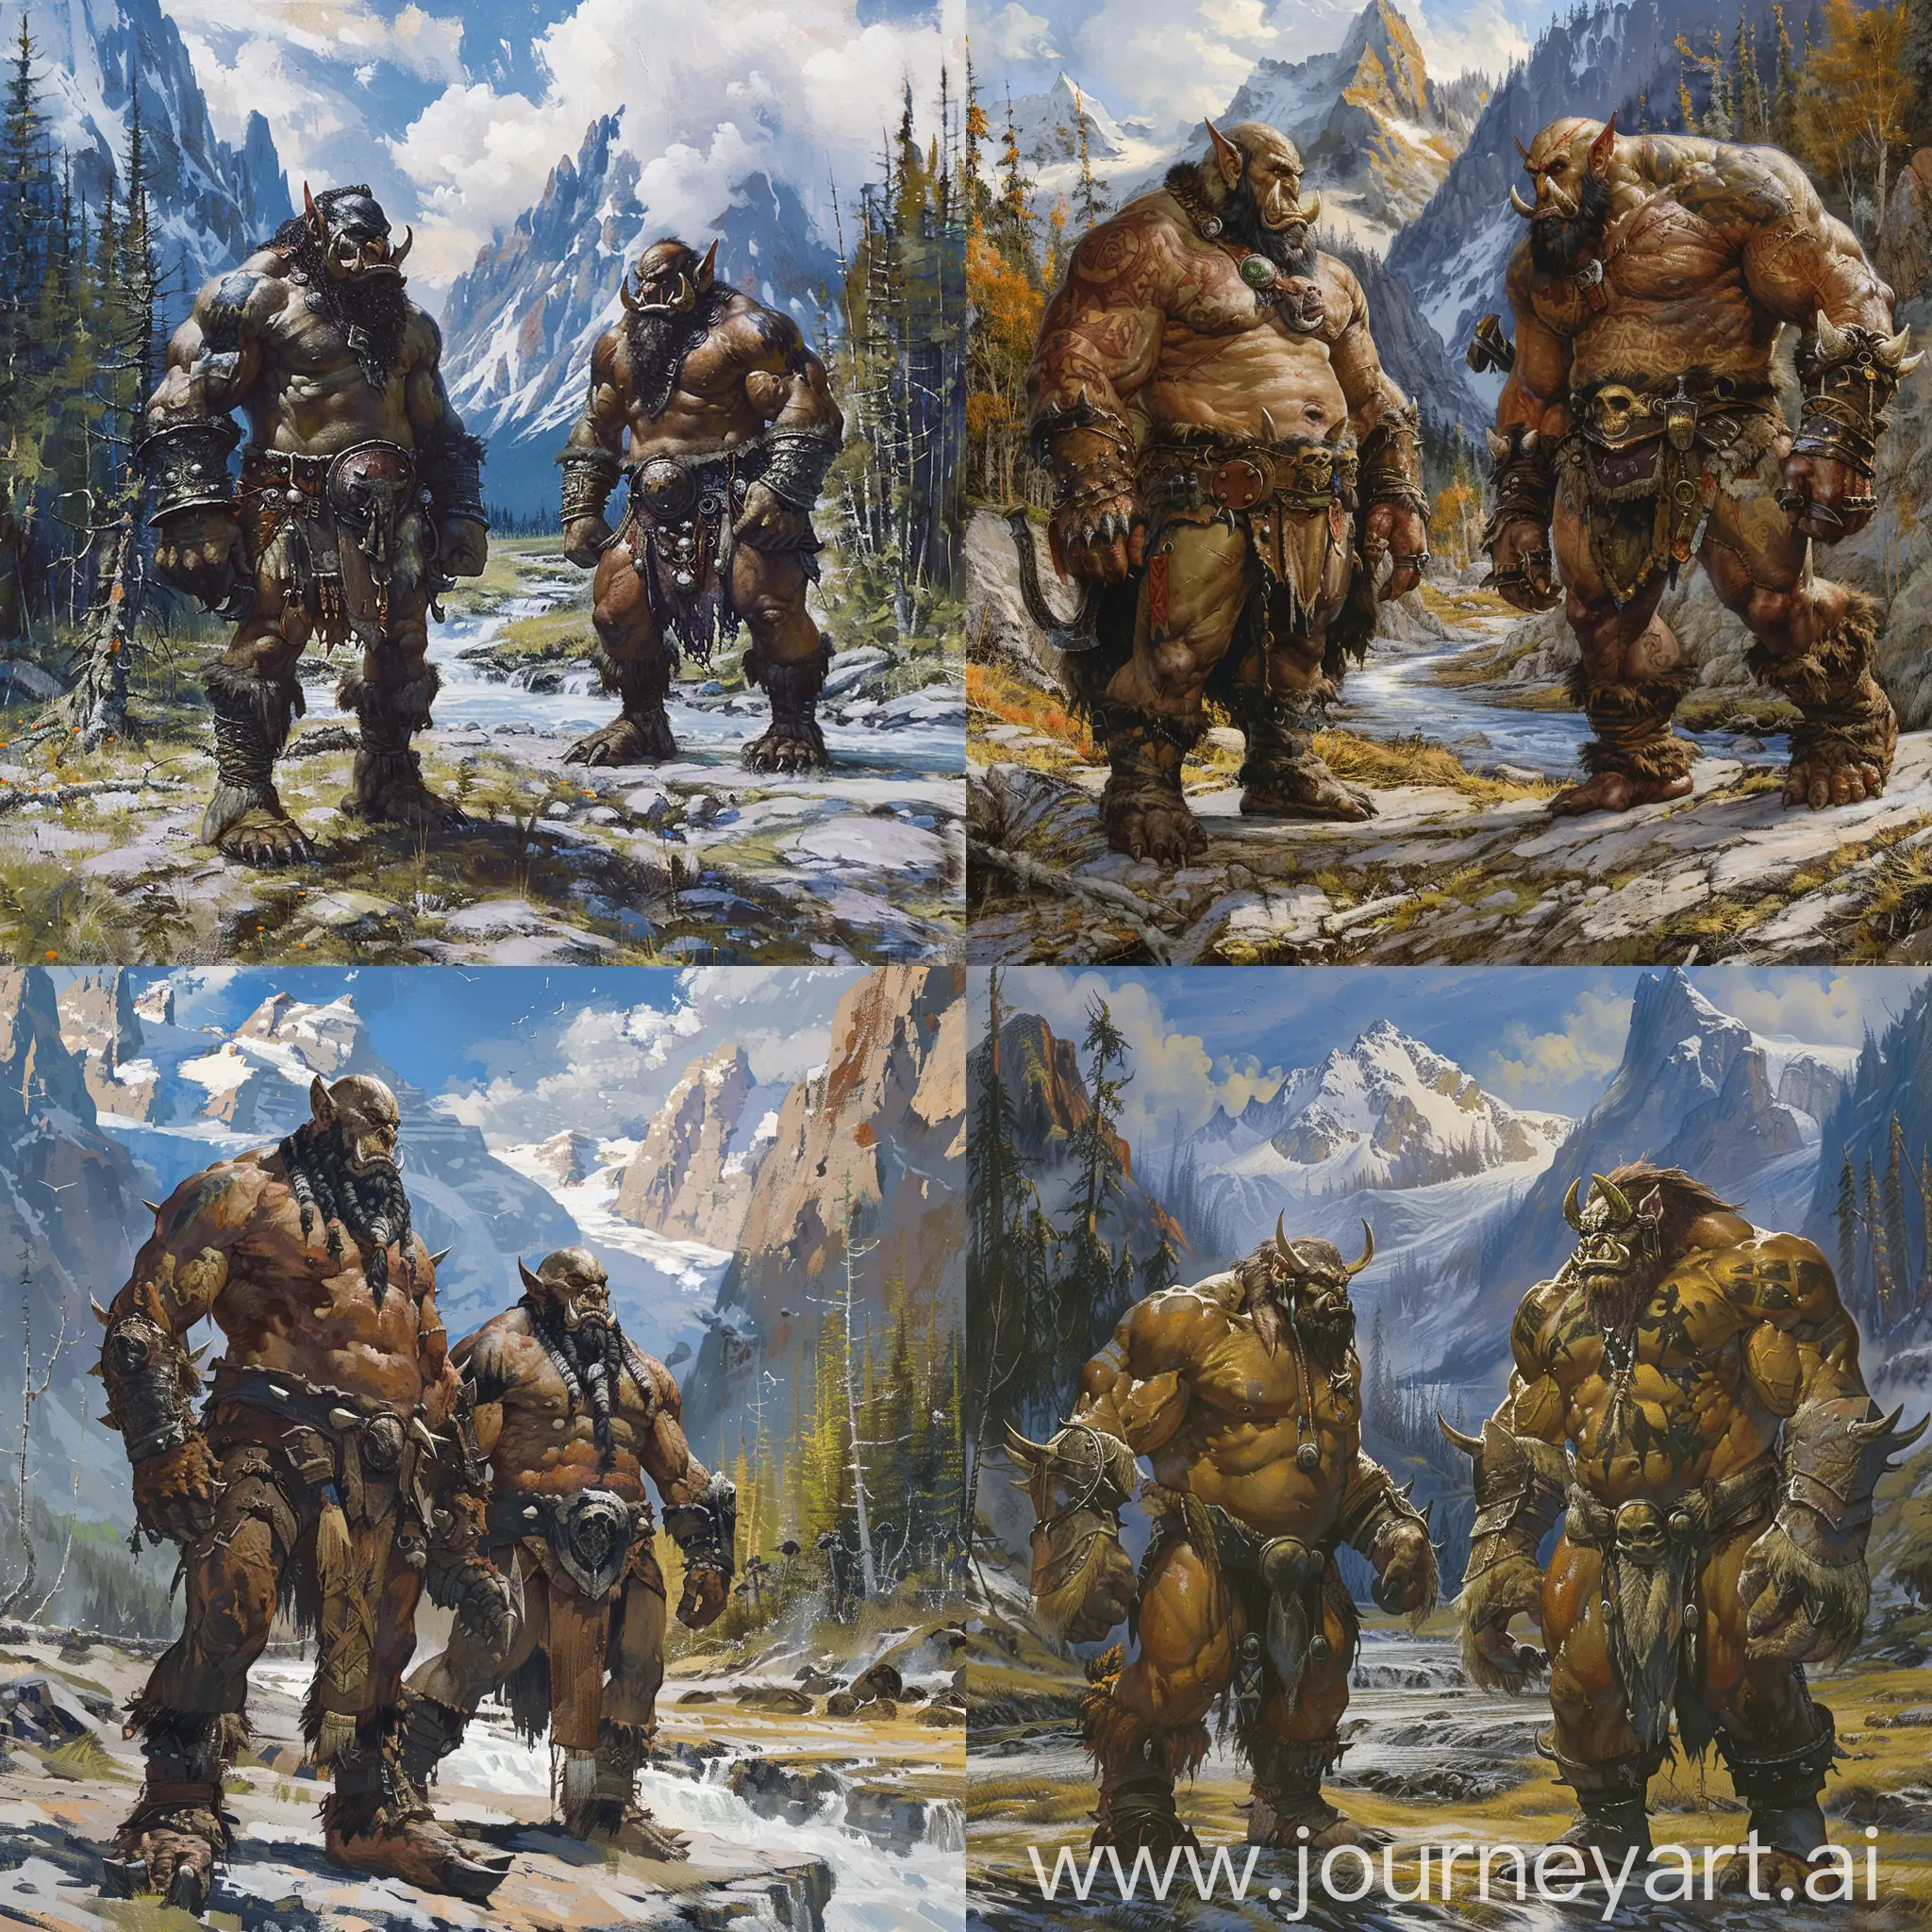 Muscular-Orcs-Inspecting-Hectare-in-Deep-Taiga-with-Mountain-River